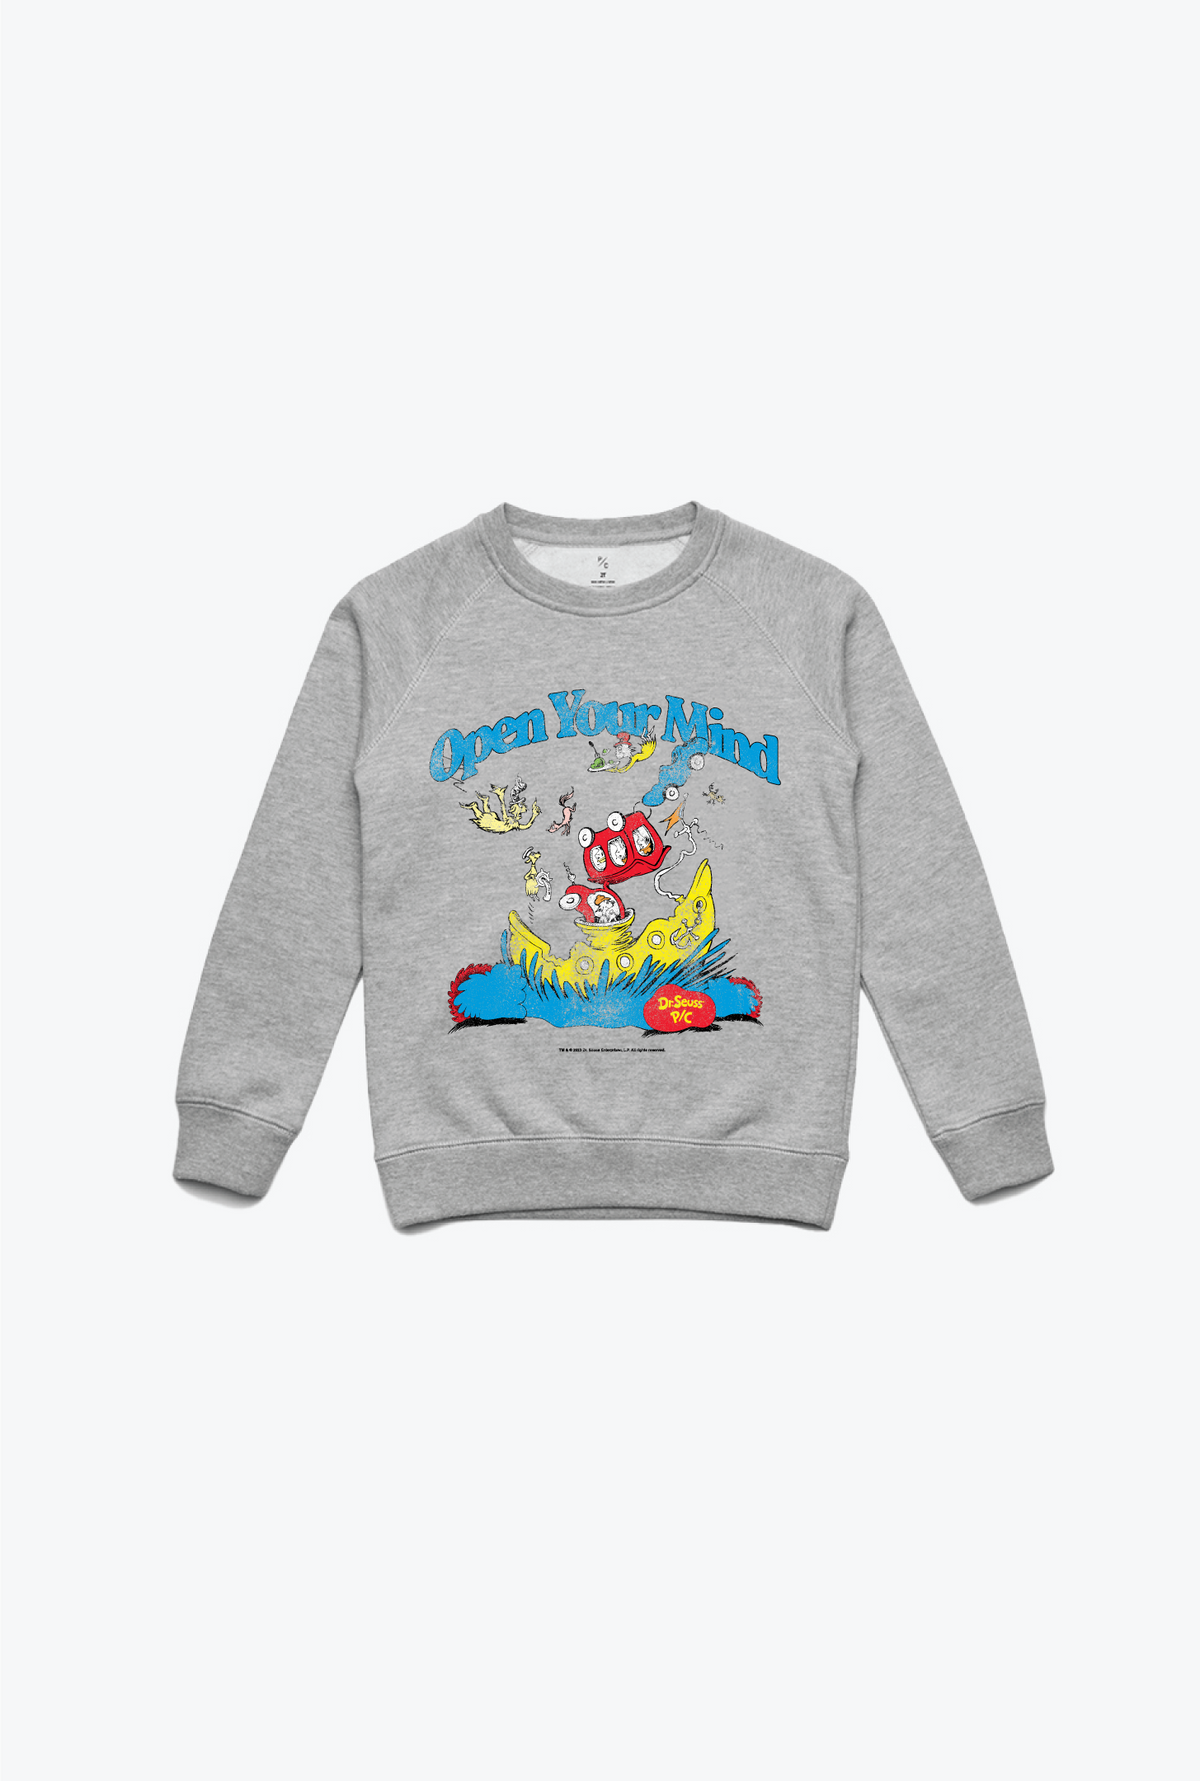 Green Eggs and Ham Open Your Mind Youth Crewneck - Grey